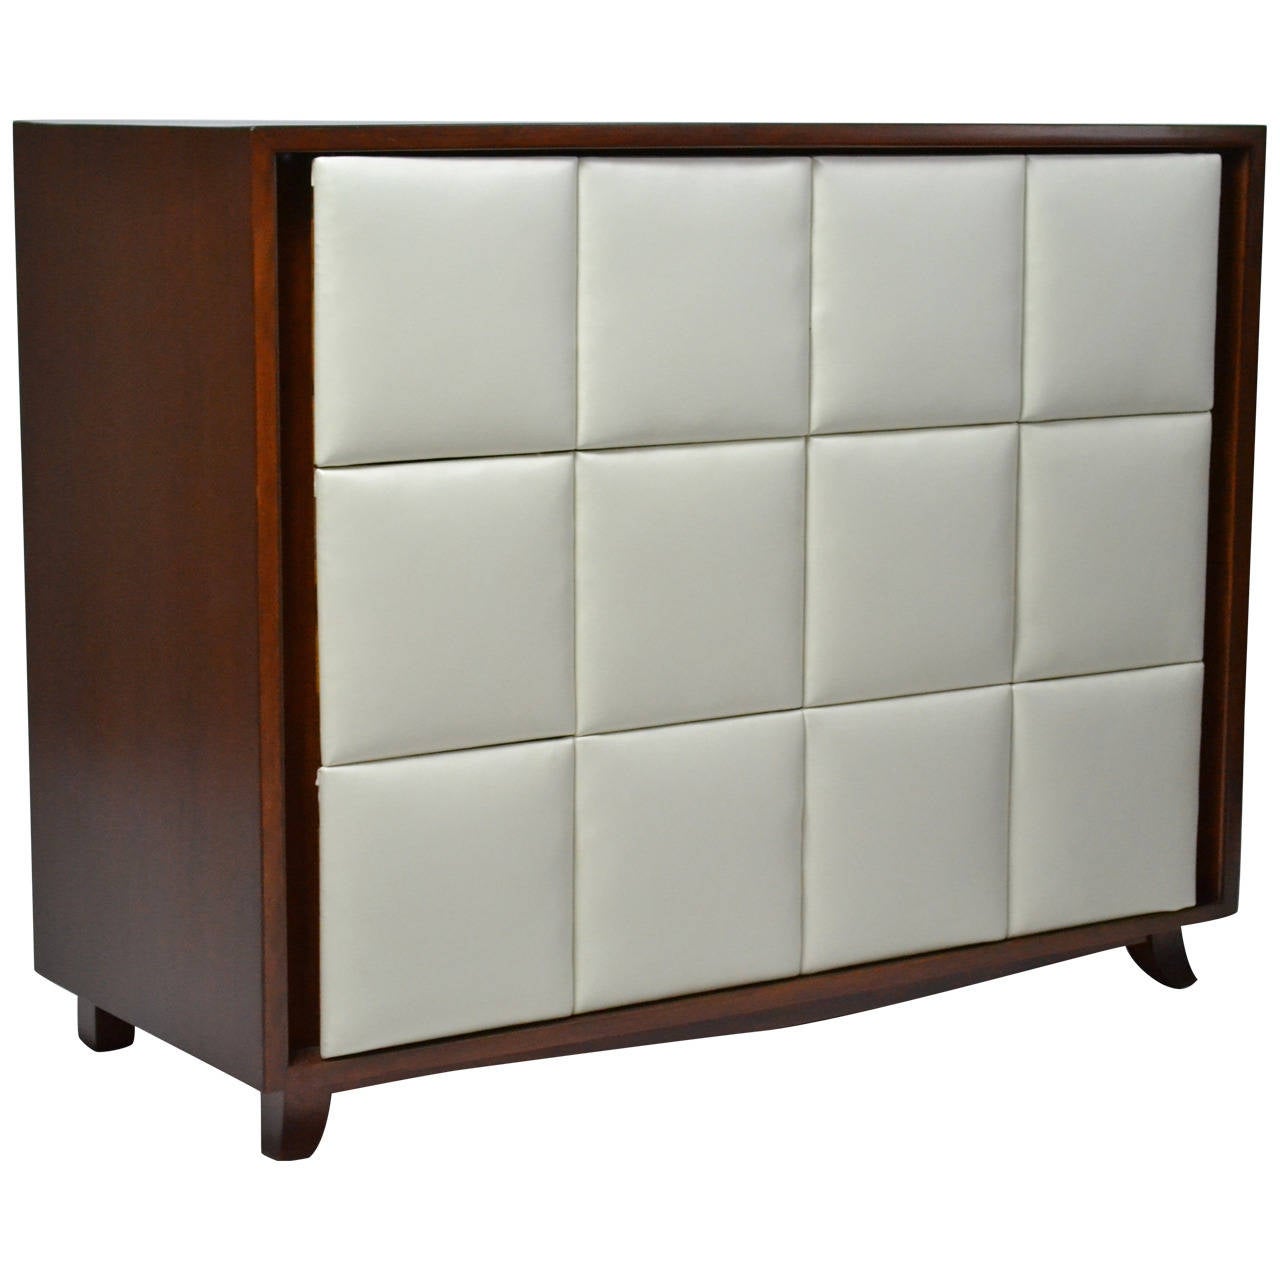 Gilbert Rohde for Herman Miller from the early 1940s  three-drawer mahogany dresser with vinyl paneled drawer fronts. 
The bureau is in excellent condition.